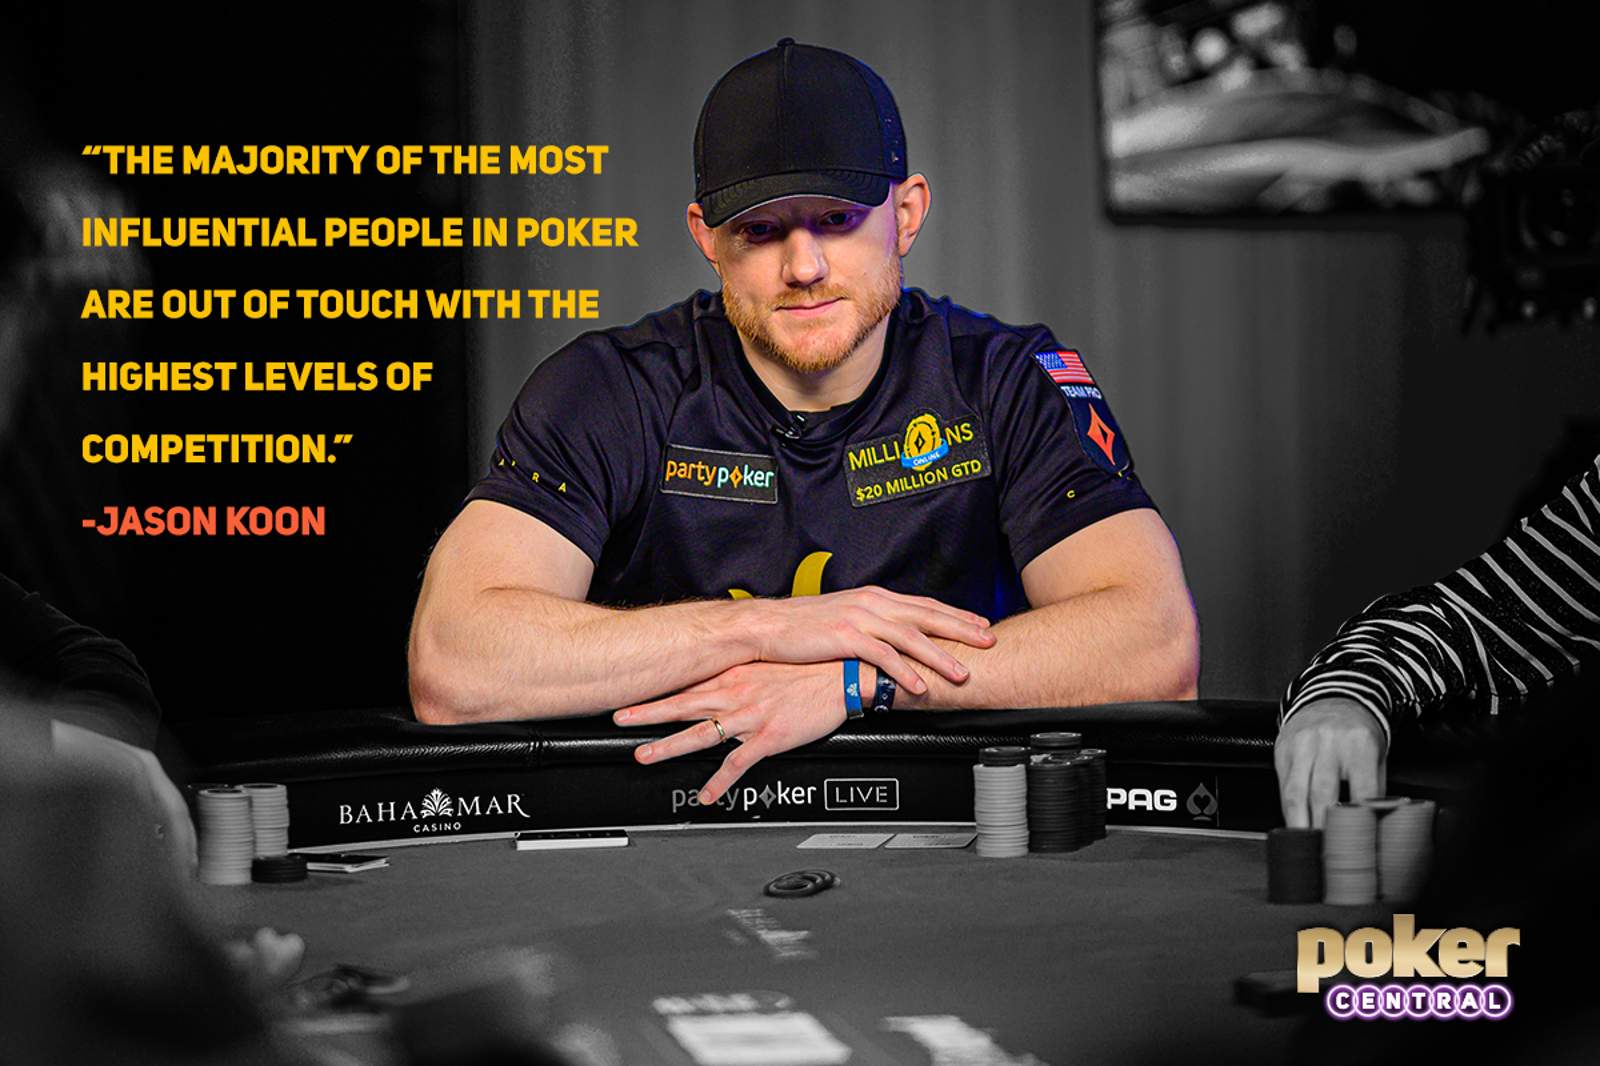 Why Did Jason Koon Open Up About His Poker Strategy?